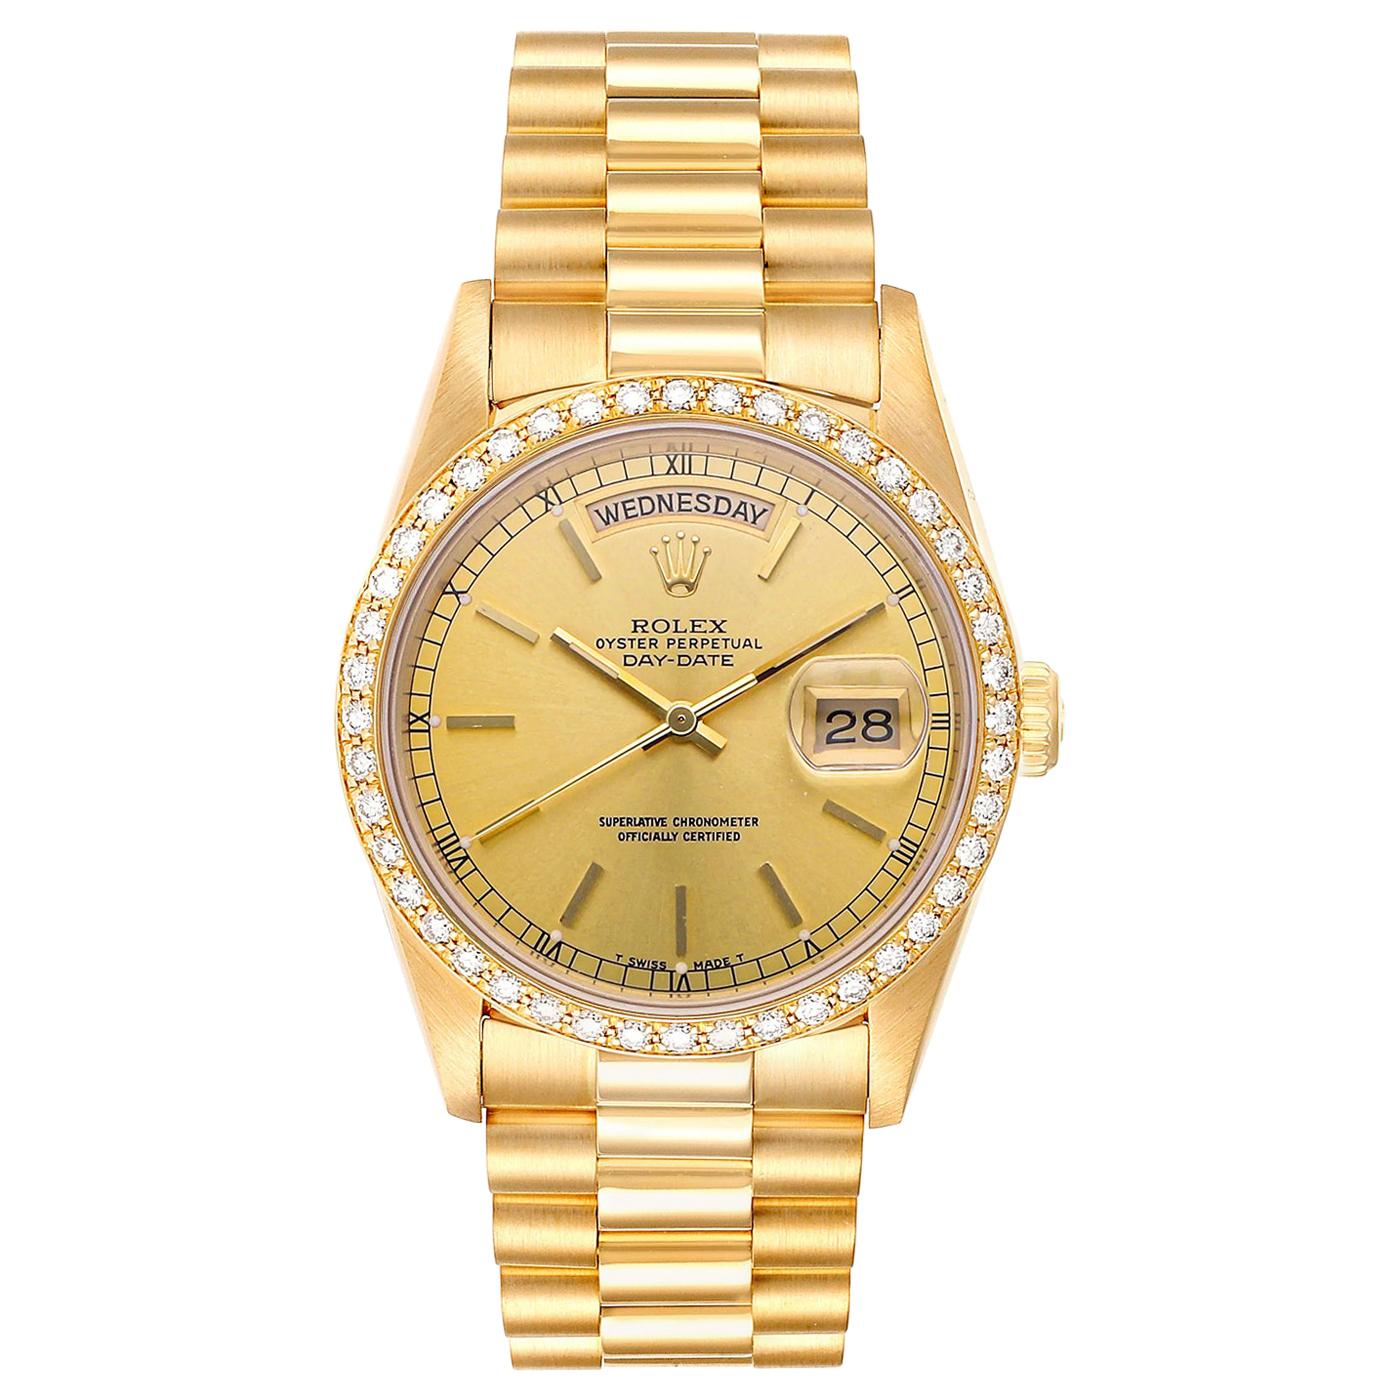 Rolex Day-Date Yellow Gold Mens Automatic President Bracelet Watch 18238